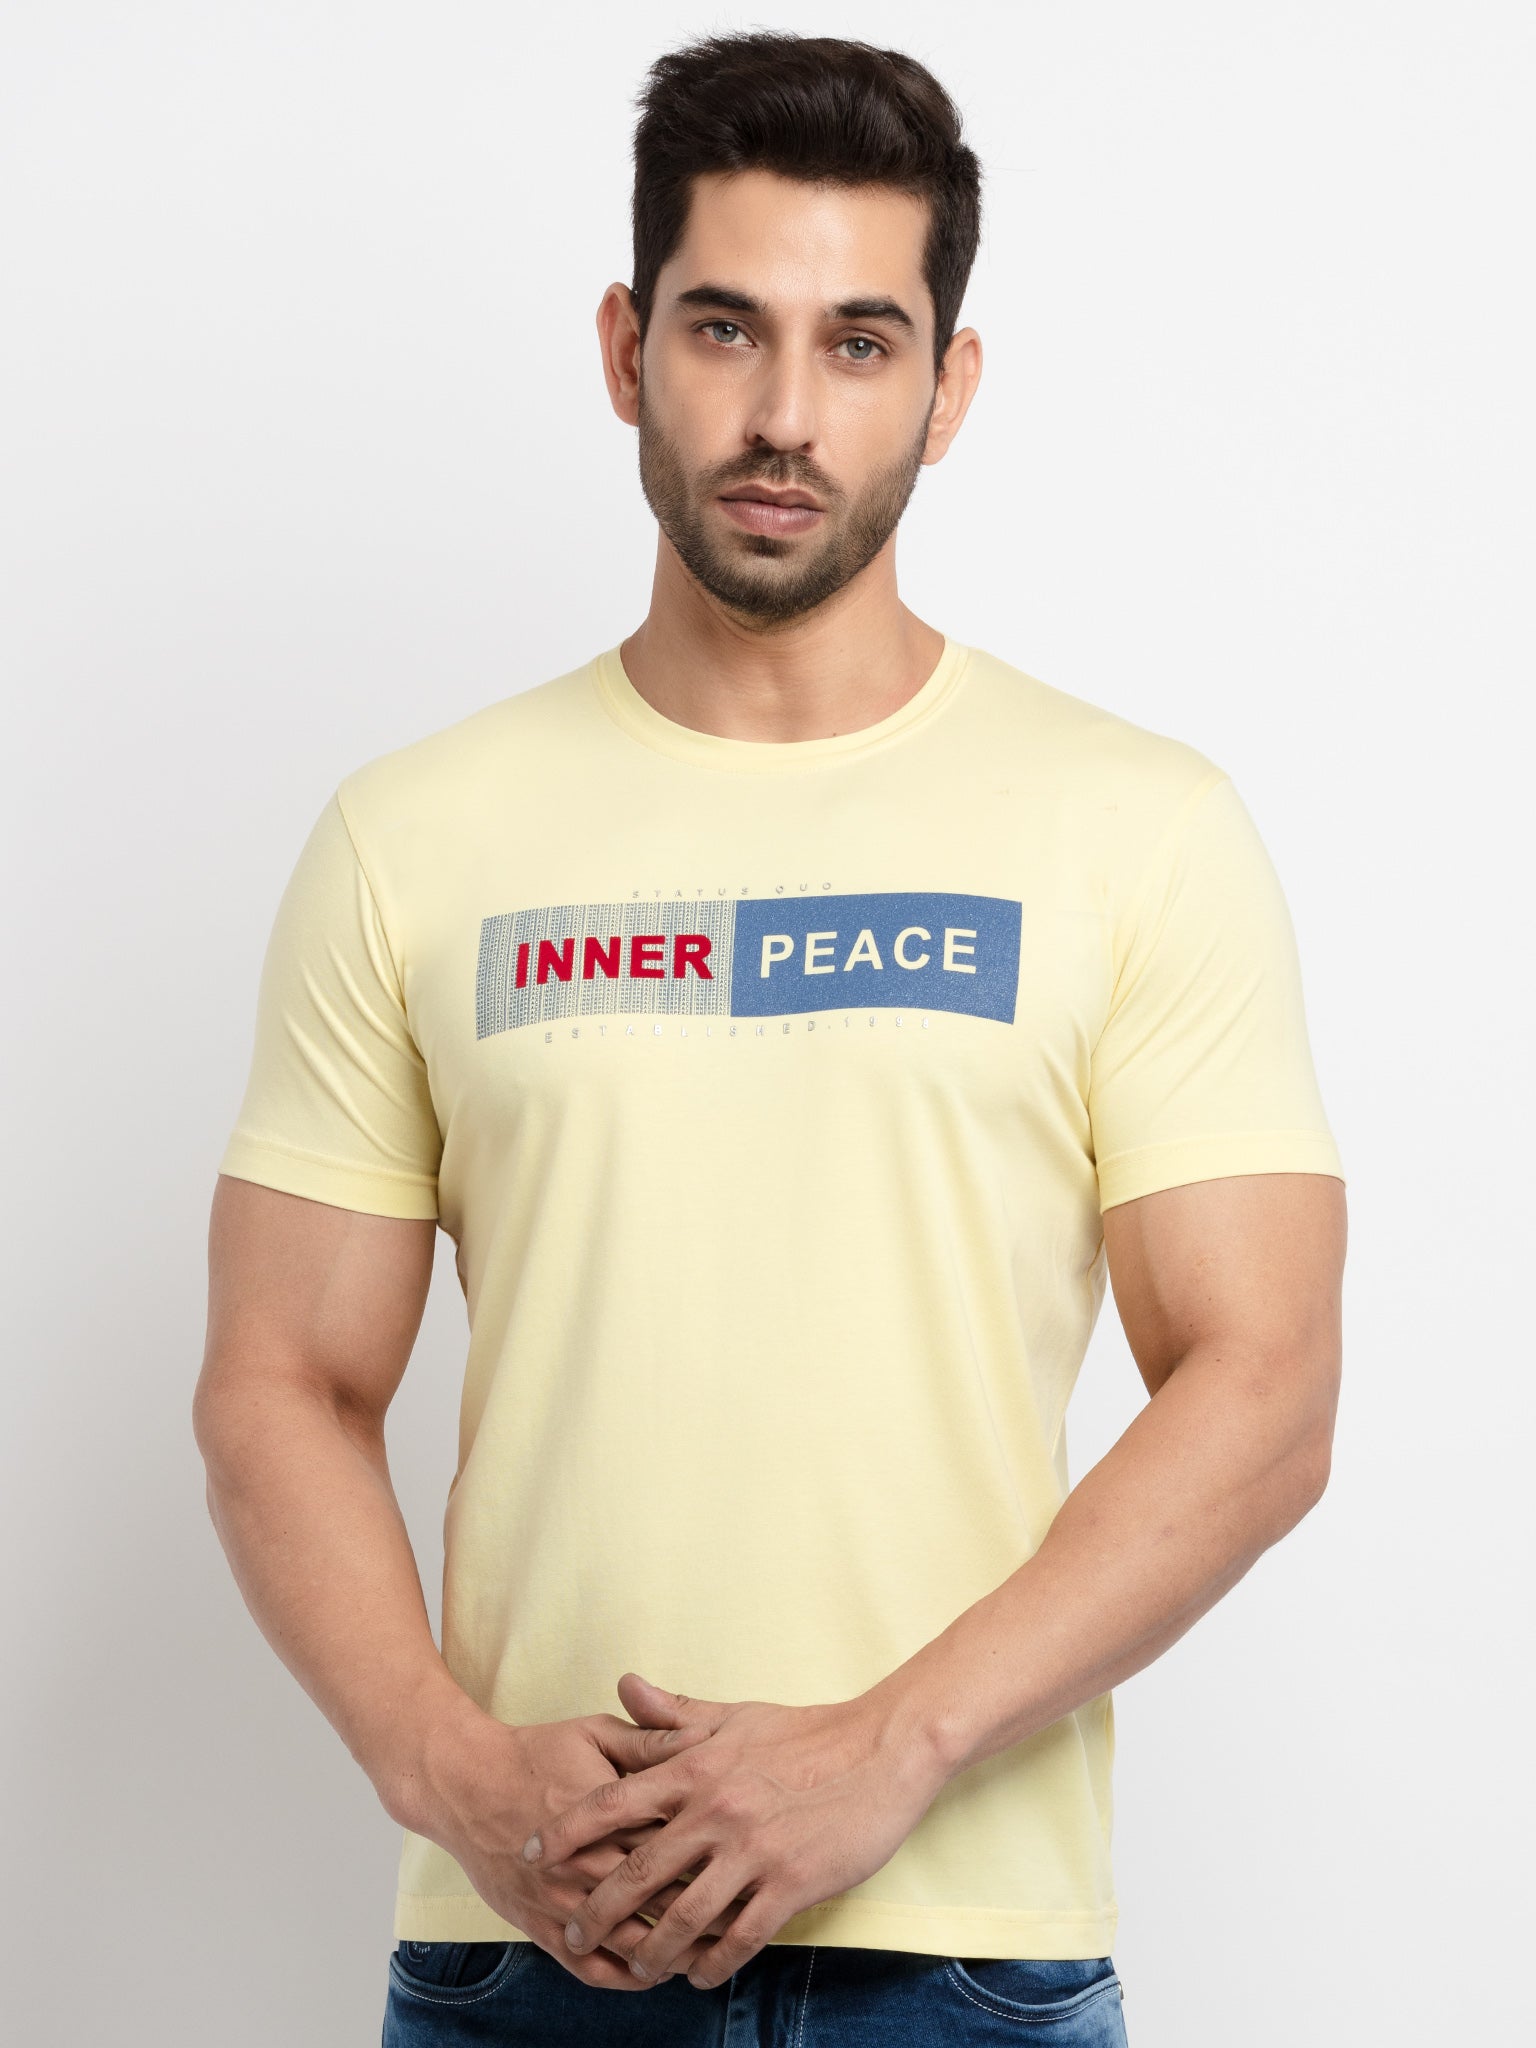 Buy Round Neck T-shirts For Men online at Status Quo